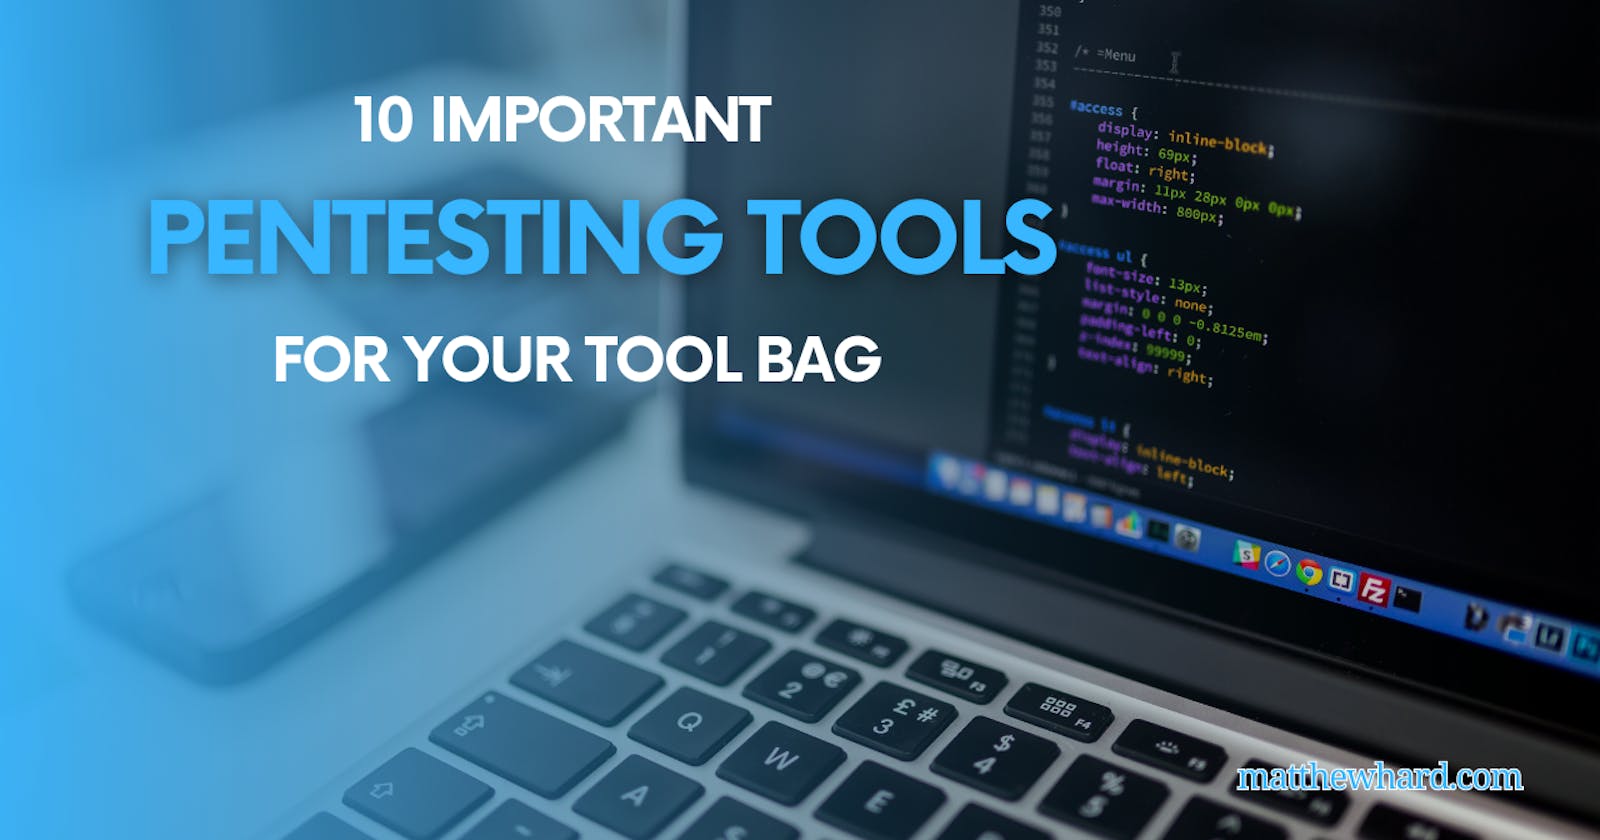 10 Important Pentesting Tools for Your Tool Bag